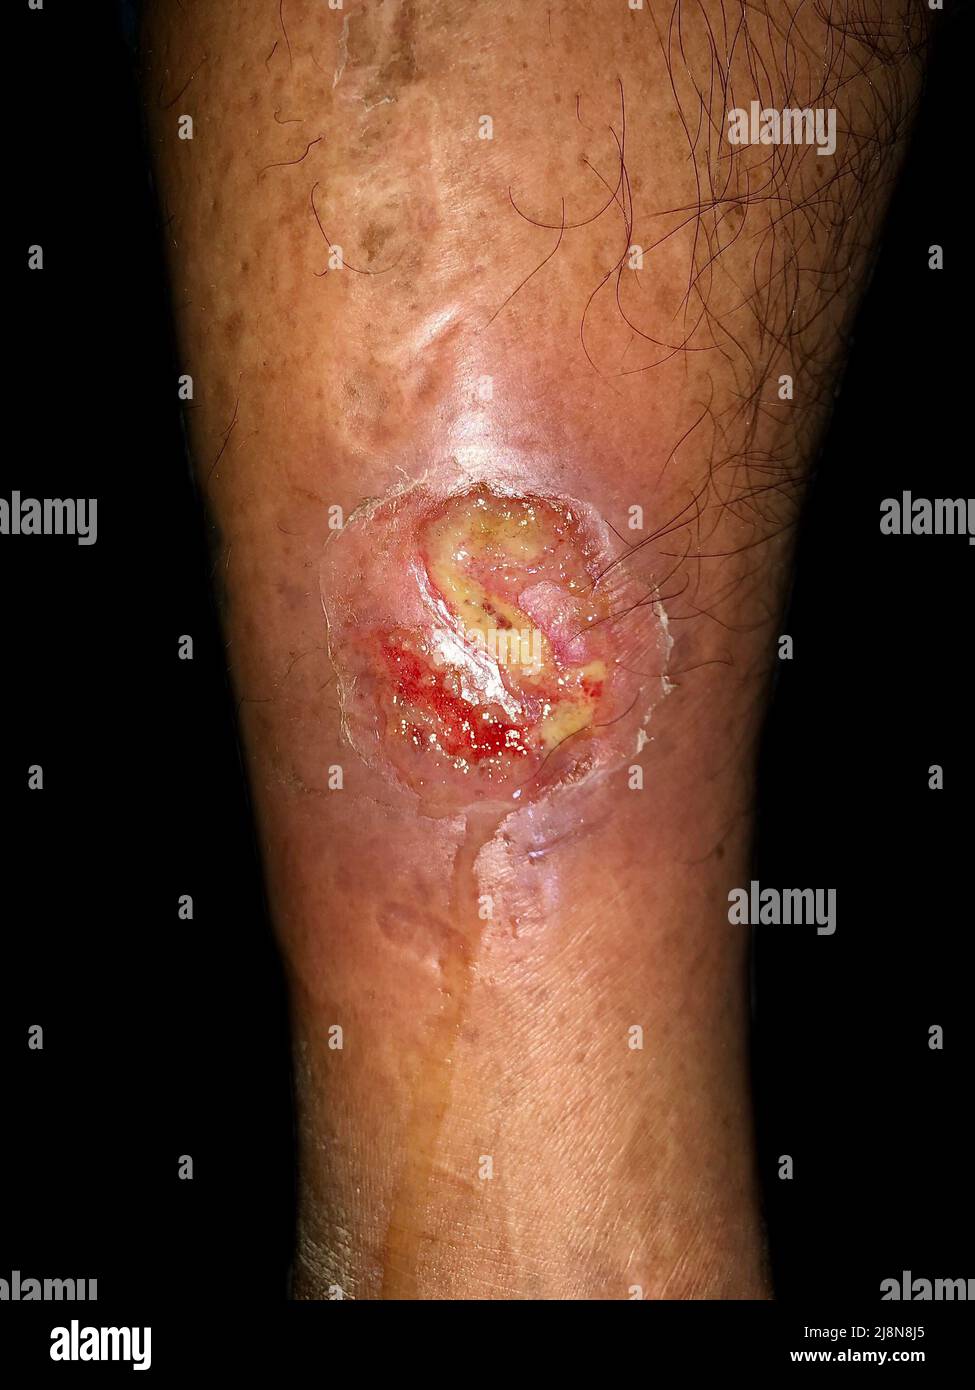 Bacterial wound infection. Infected traumatic wound in the leg of Asian man. Stock Photo